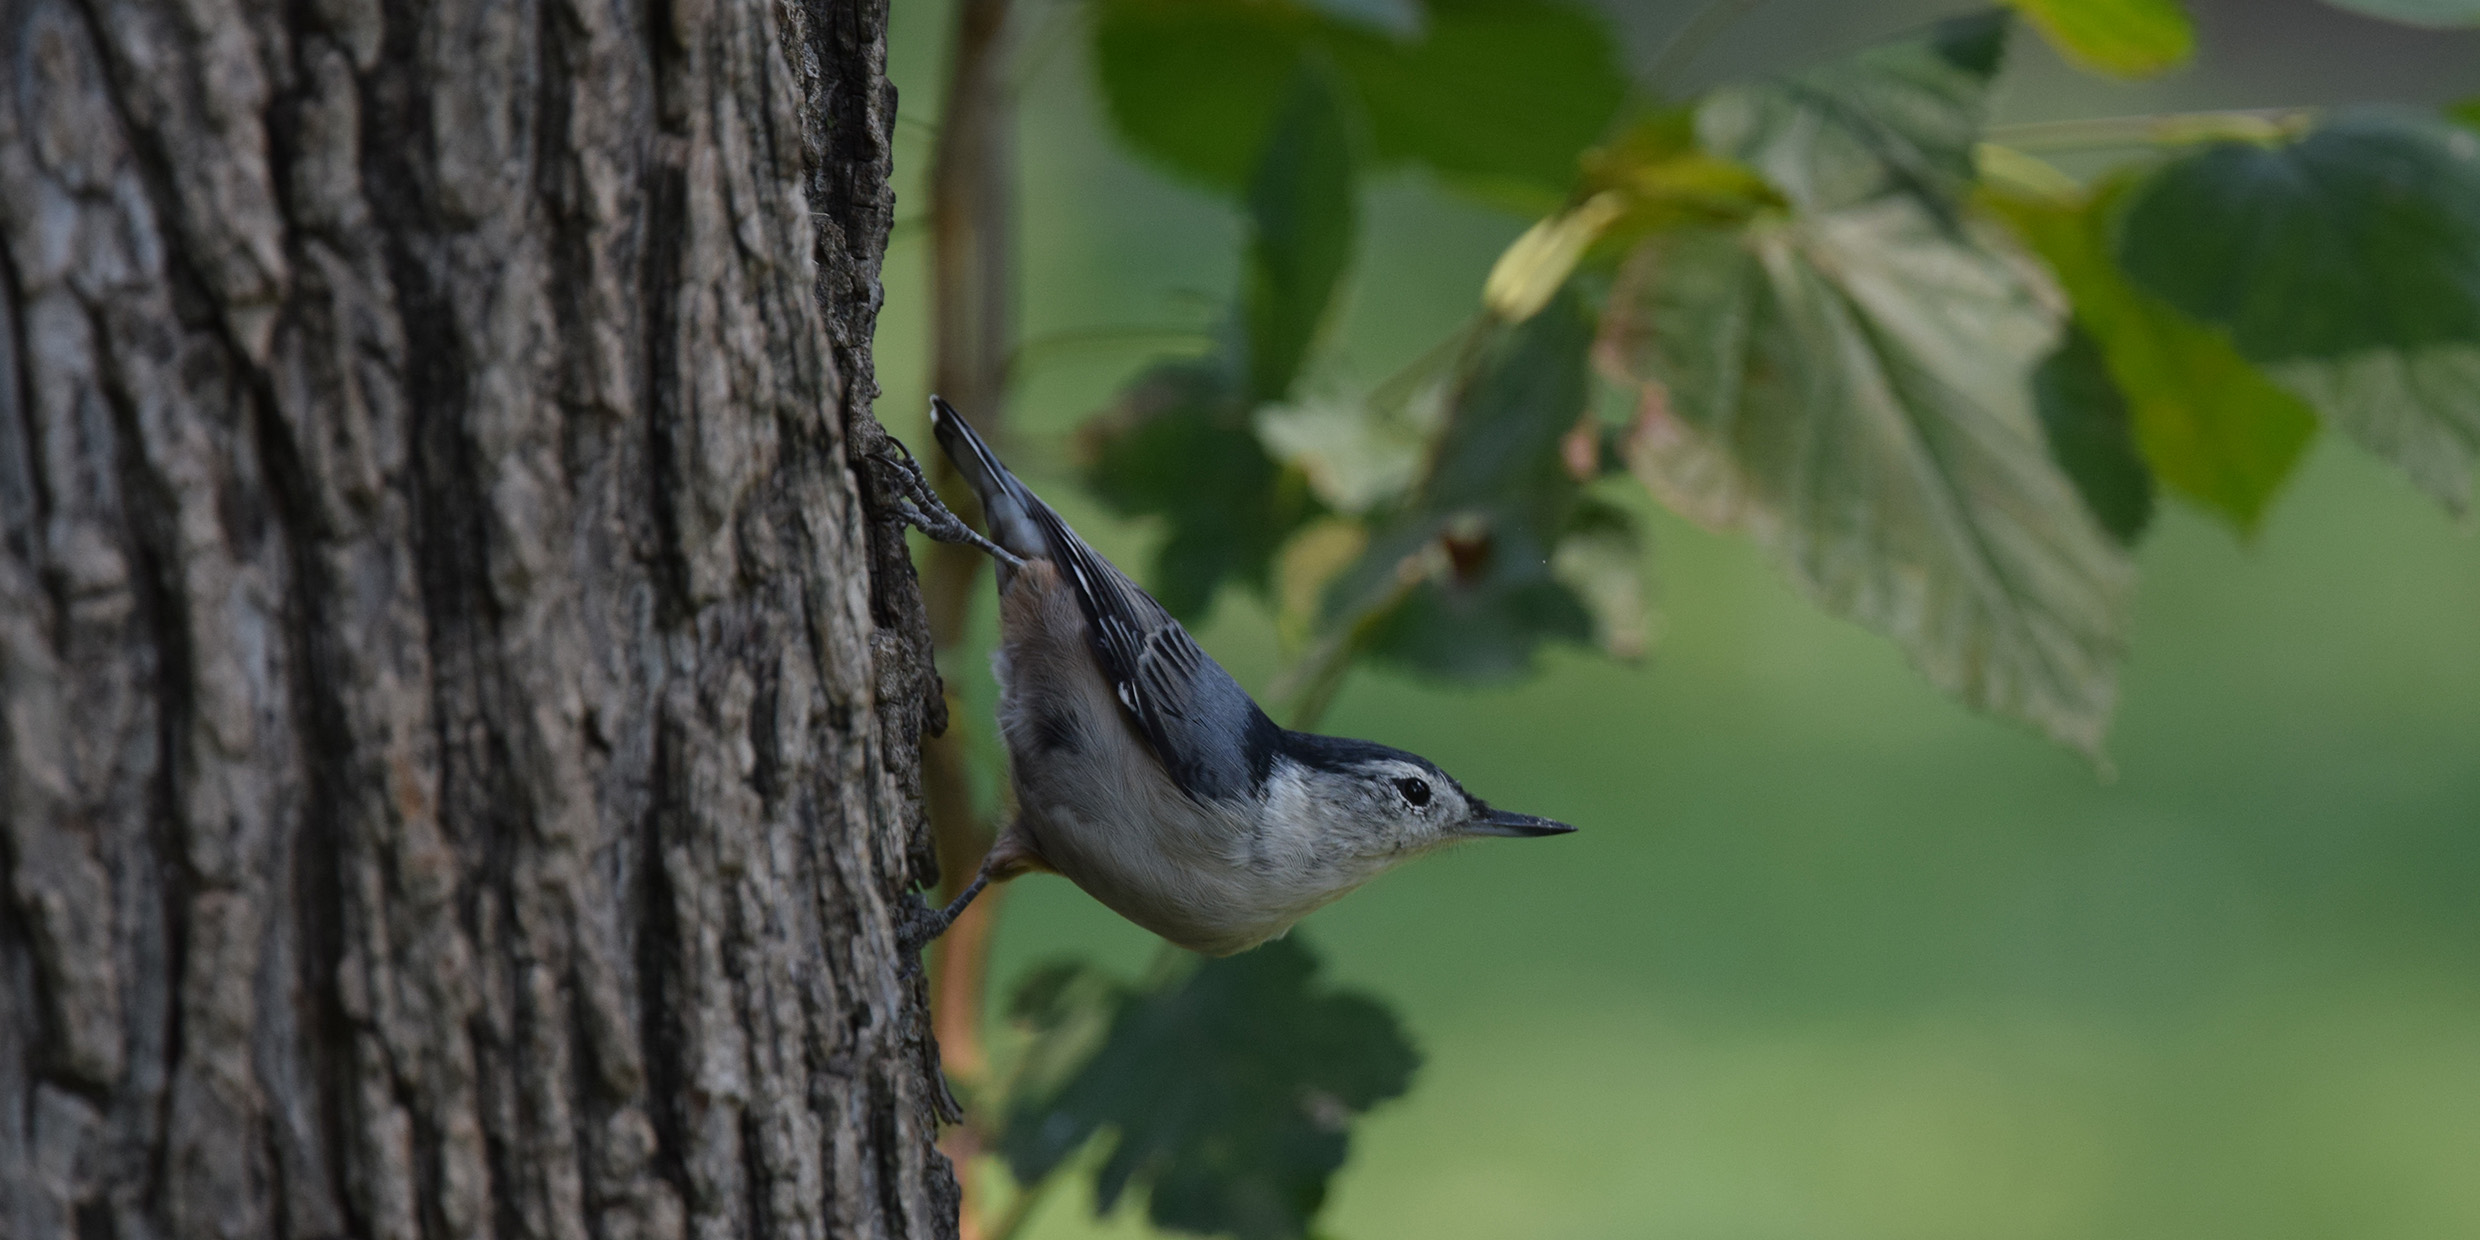 Image of nuthatch on tree